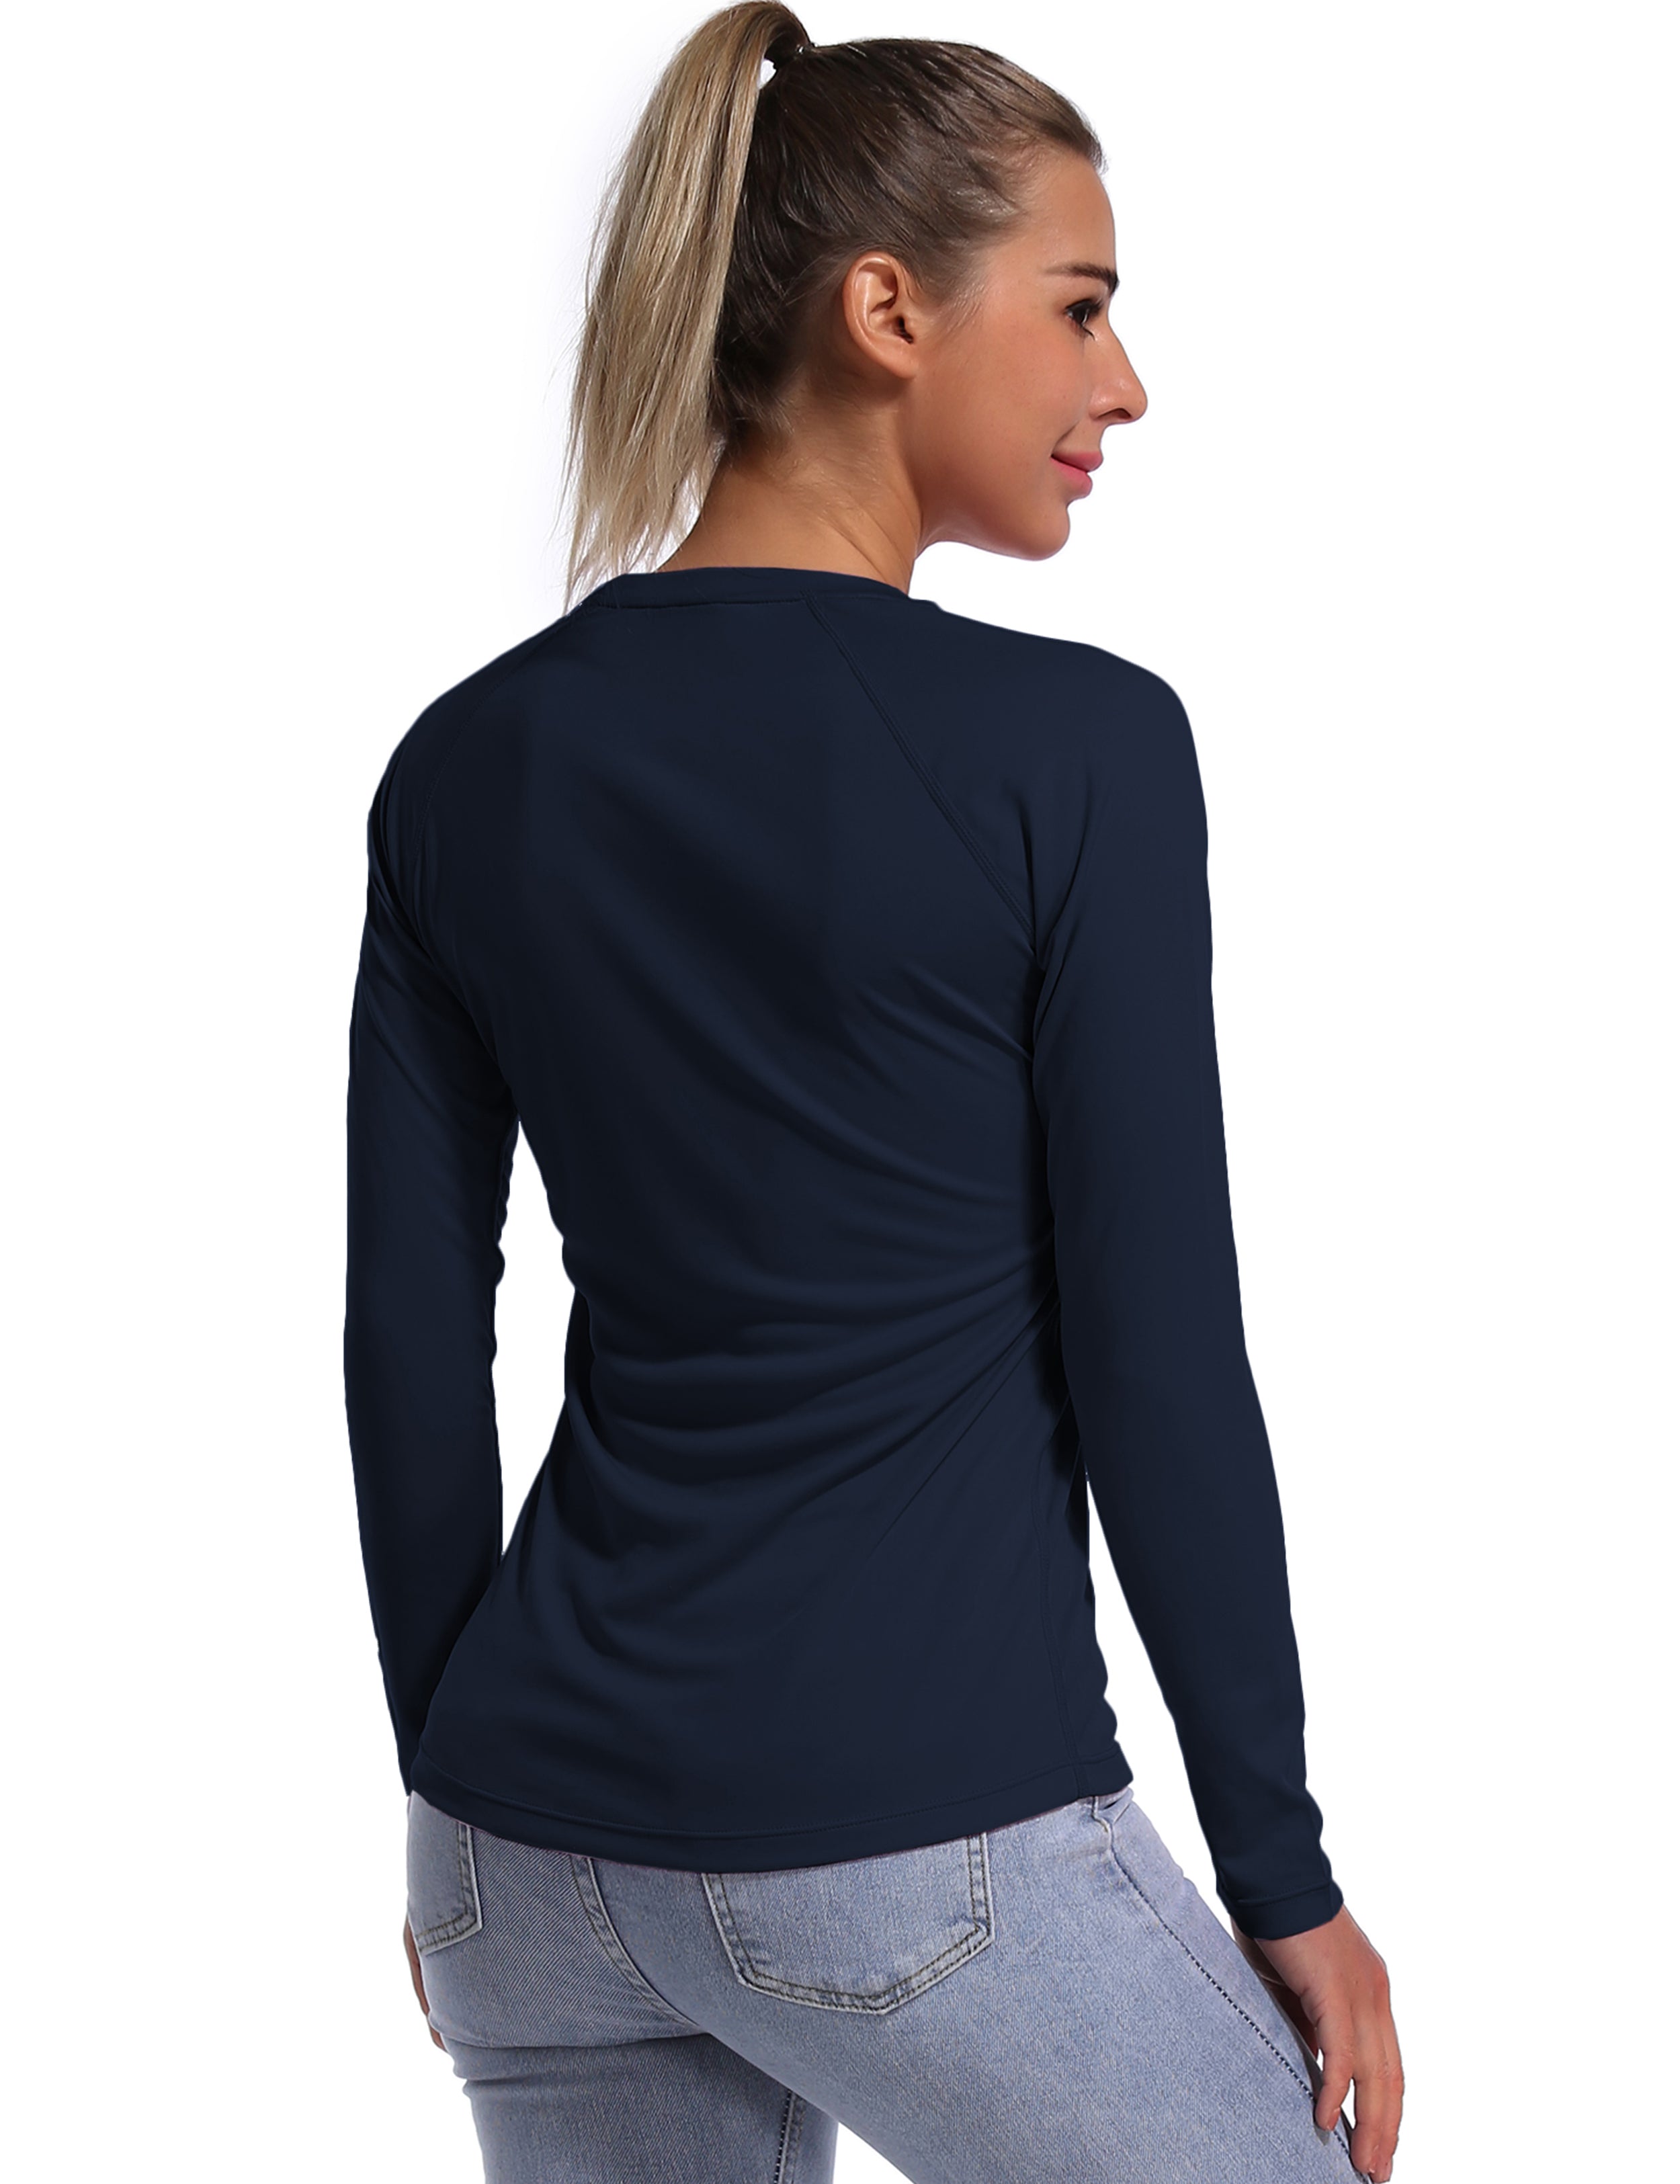 Long Sleeve Athletic Shirts darknavy 100% polyester Lightweight Slim Fit UPF 50+ blocks sun's harmful rays Treated to wick moisture, dries ultra-fast